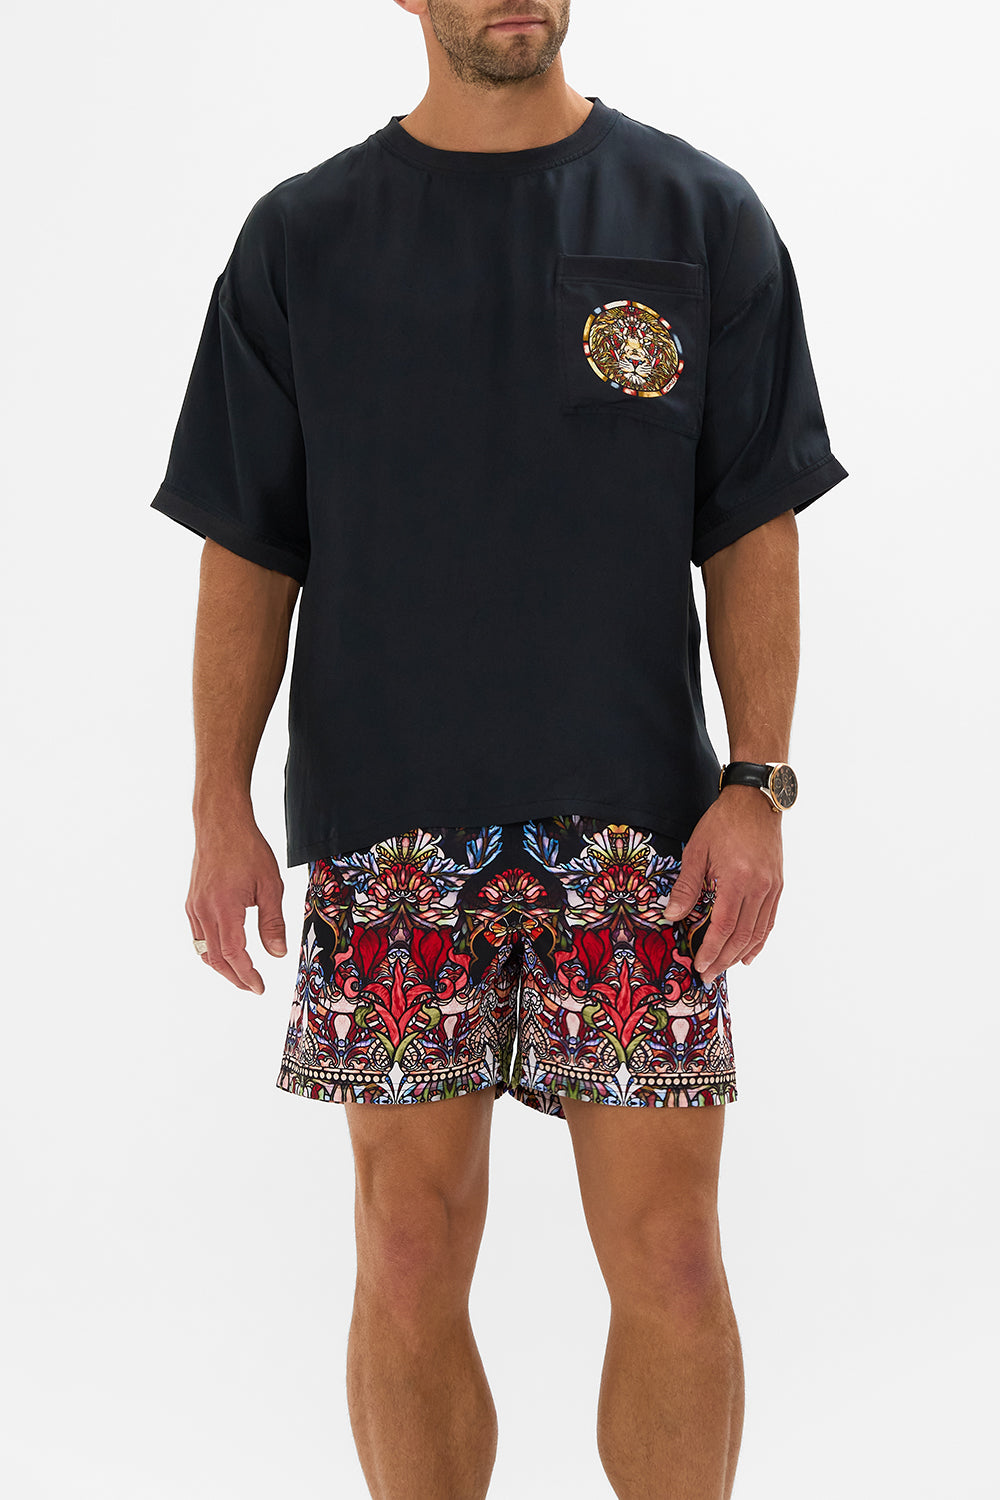 Hotel Franks by CAMILLA black men's woven t-shirt in Leadlight Legends